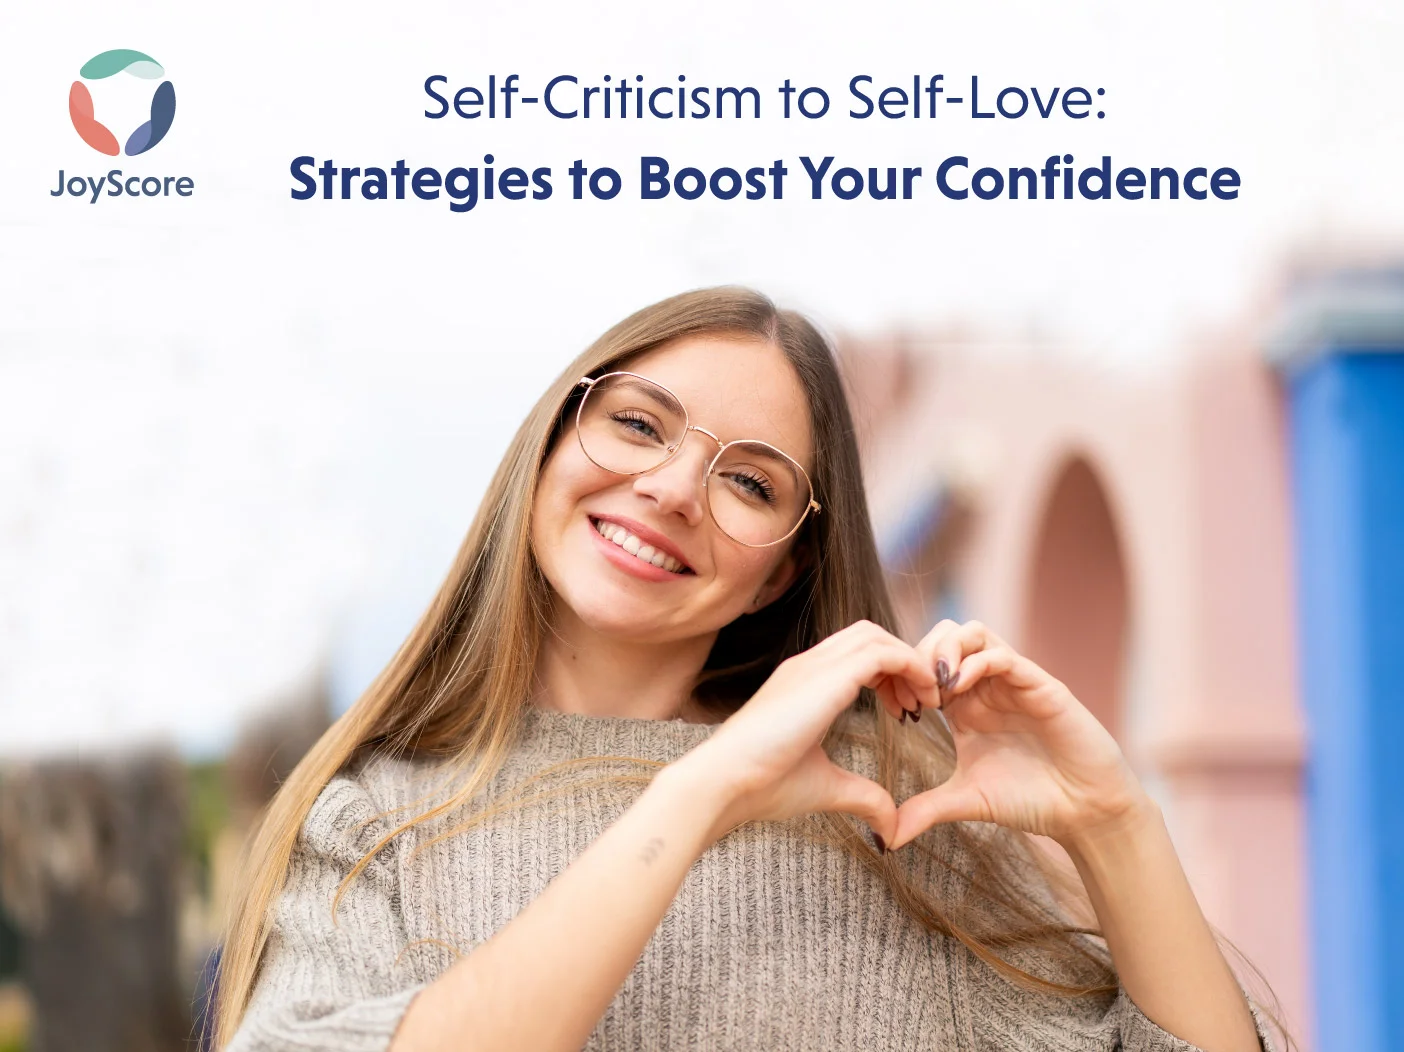 From Self-Criticism to Self-Love Strategies to Break the Cycle and Boost Your Confidenc